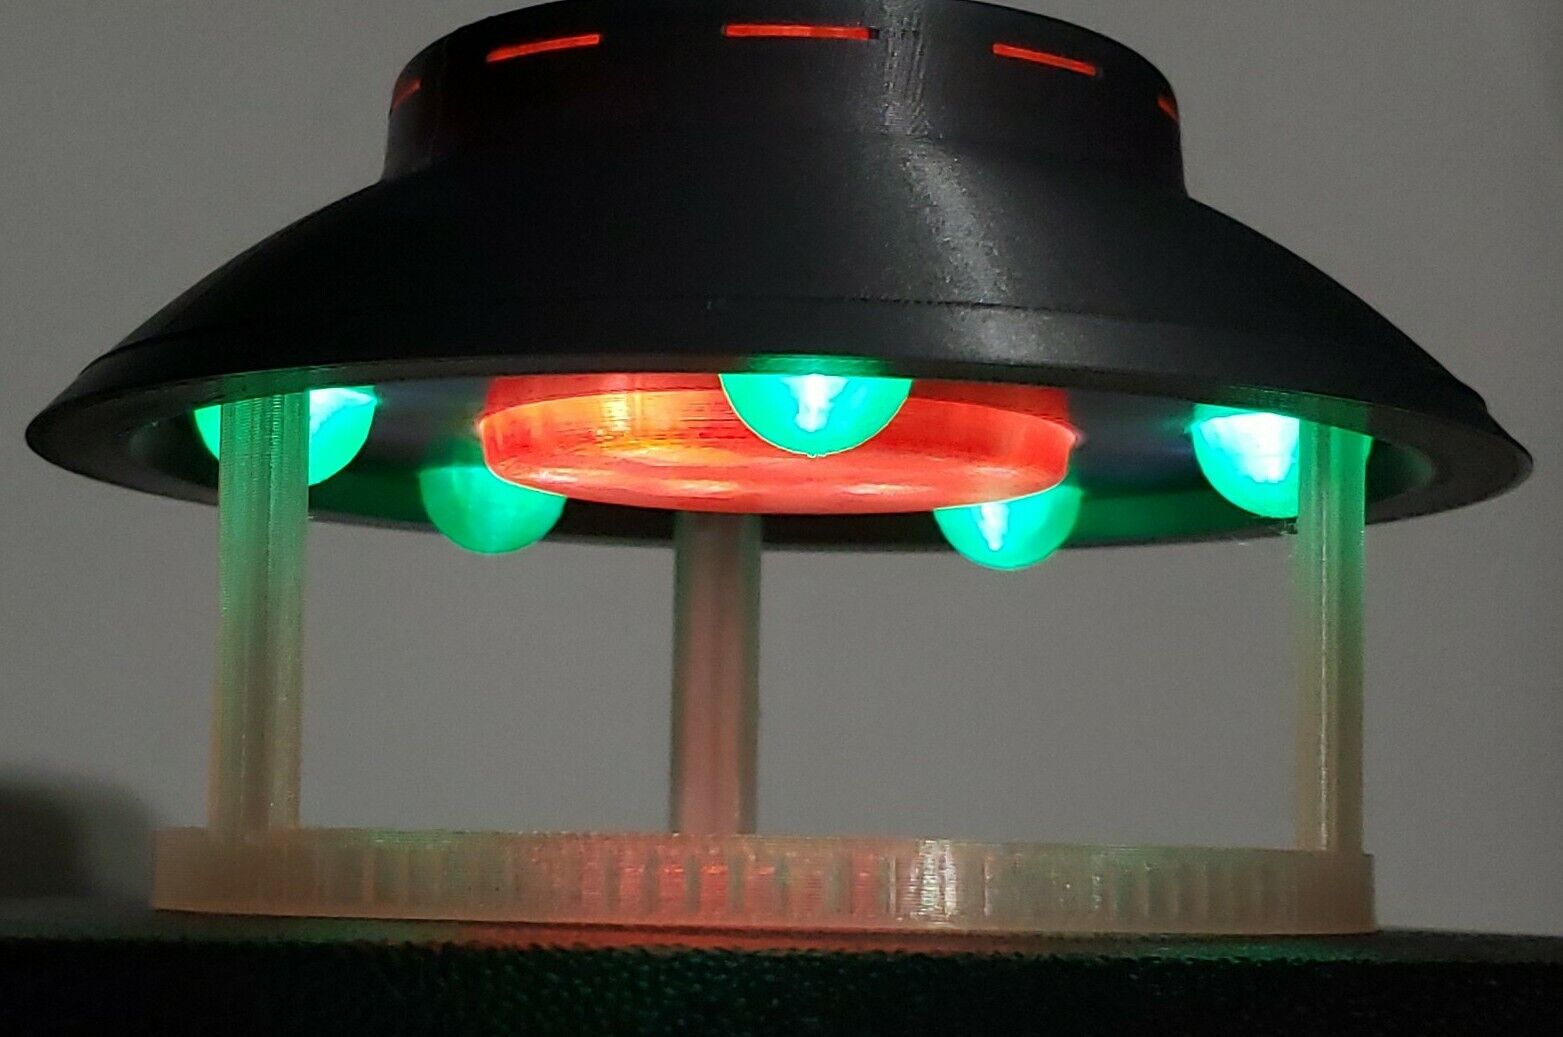 The Invaders UFO/Flying Saucer - Medium - in Flight With Stand & light